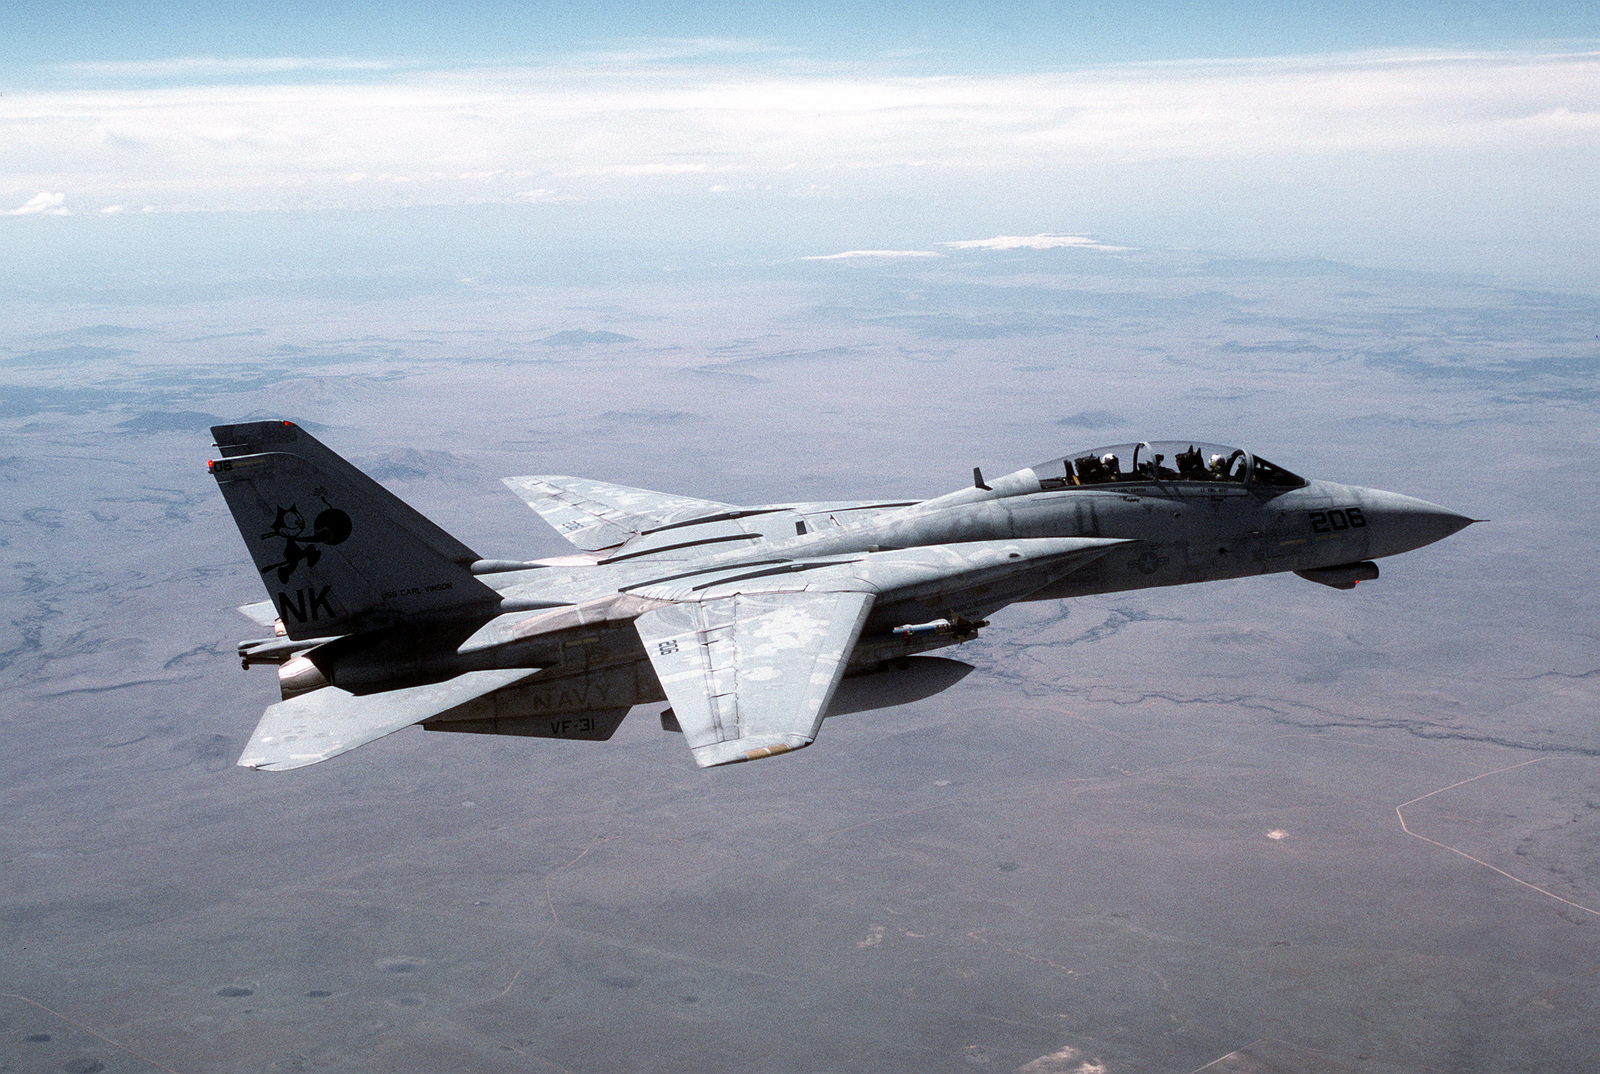 a-side-view-of-an-f-14d-tomcat-from-the-vf-31-tomcatters-as-it-flies-a-close-9e0add-1600.jpg